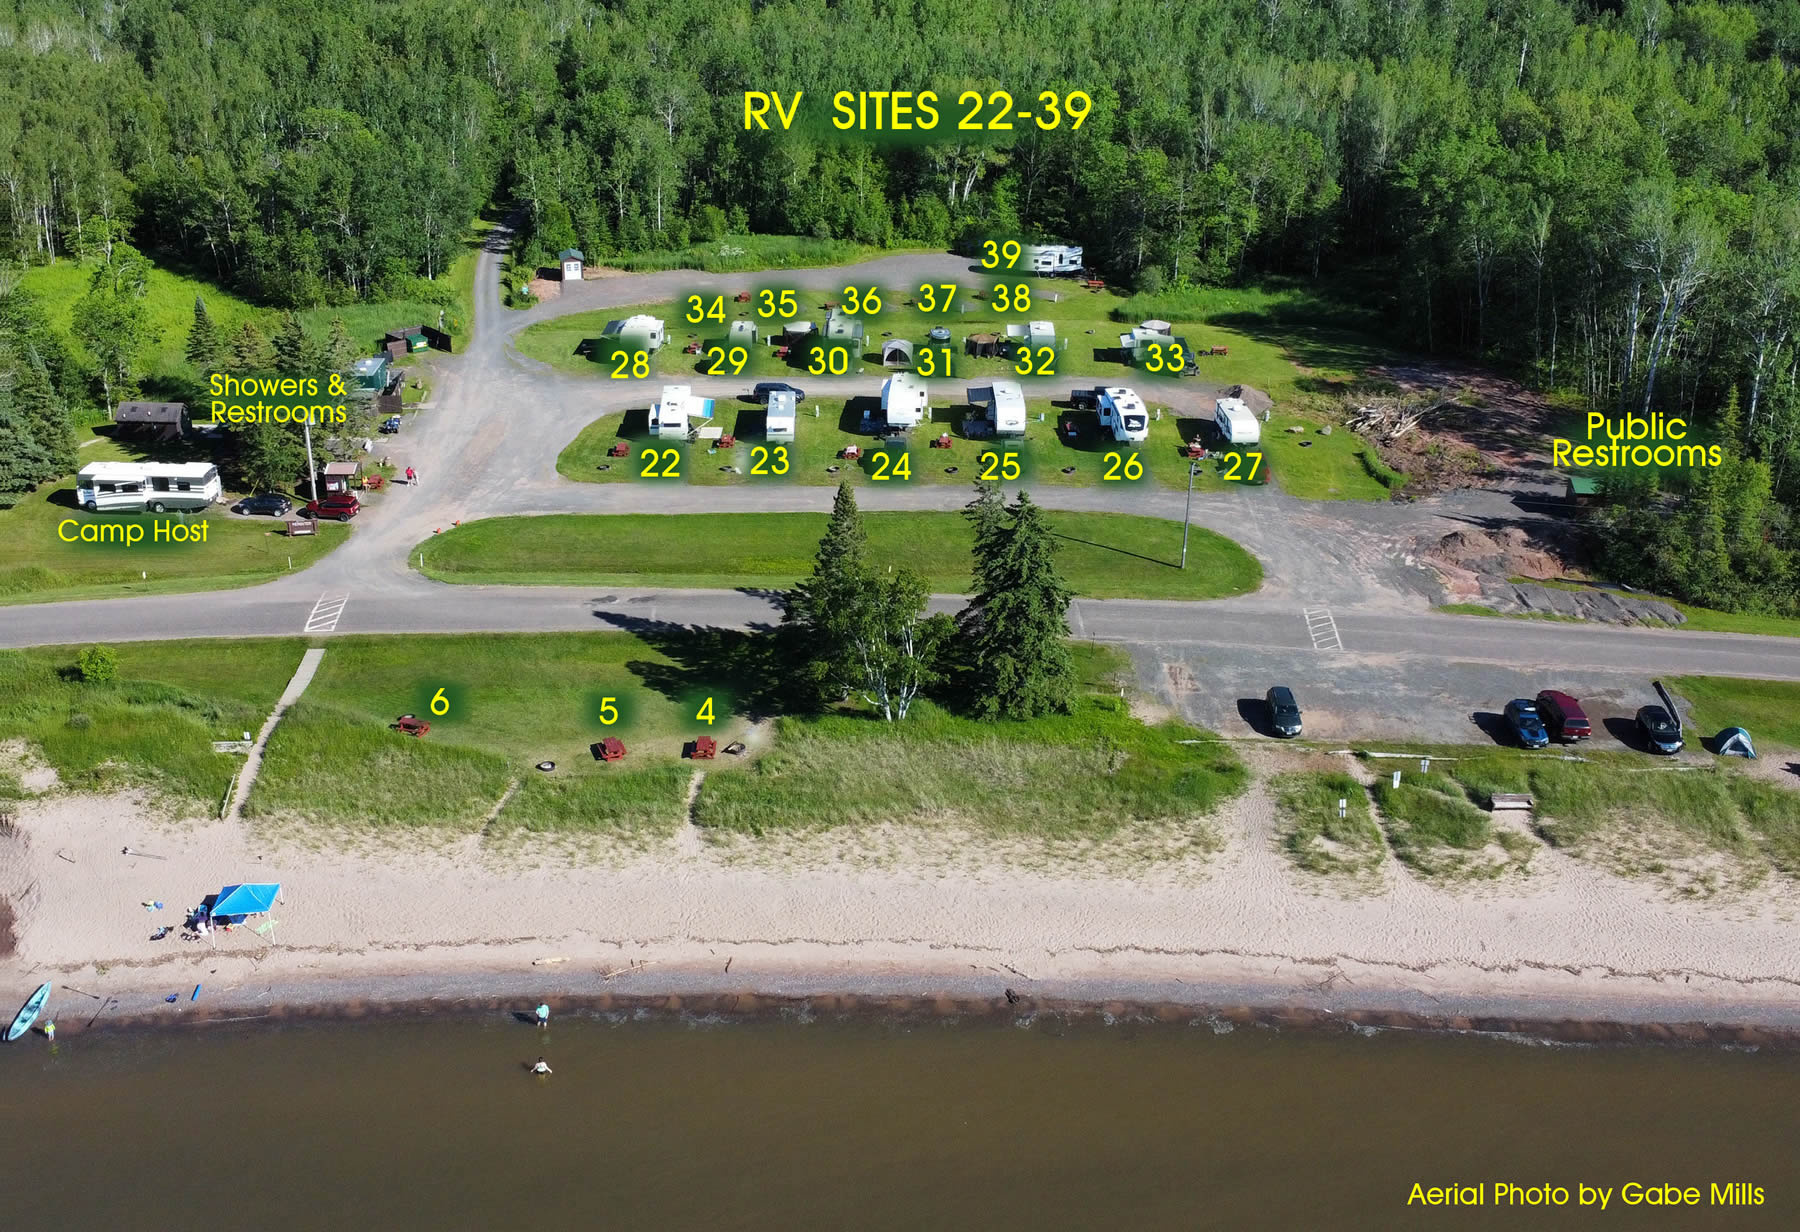 Aerial photo of The Town of Clover campgrounds in Herbster, Wisconsin